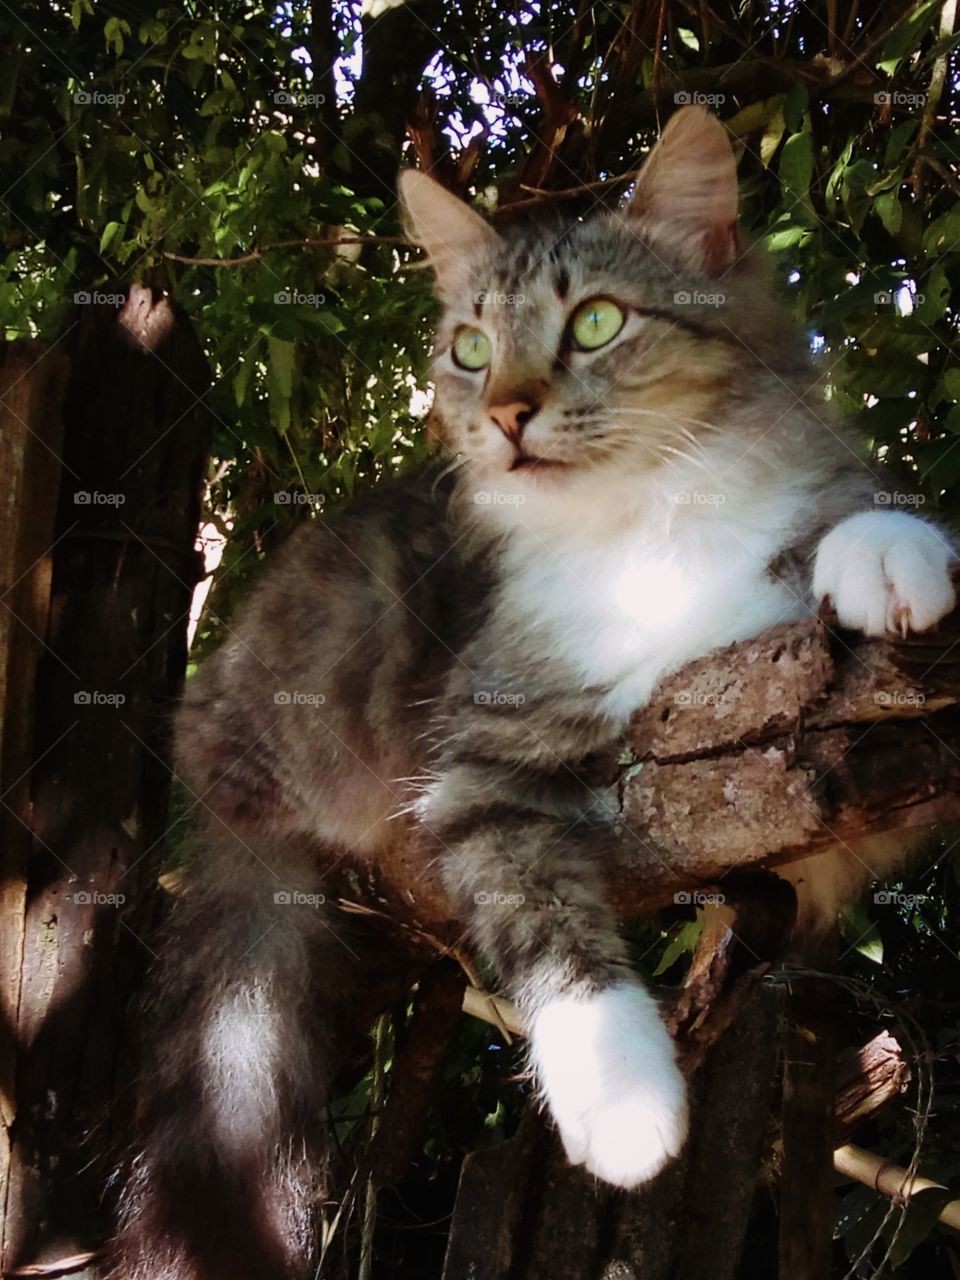 Tom is a beautiful, cheerful, fun cat who loves to stand on a tree trunk looking at the landscape and the birds. This is his favorite hobby, he has fun watching the birds.